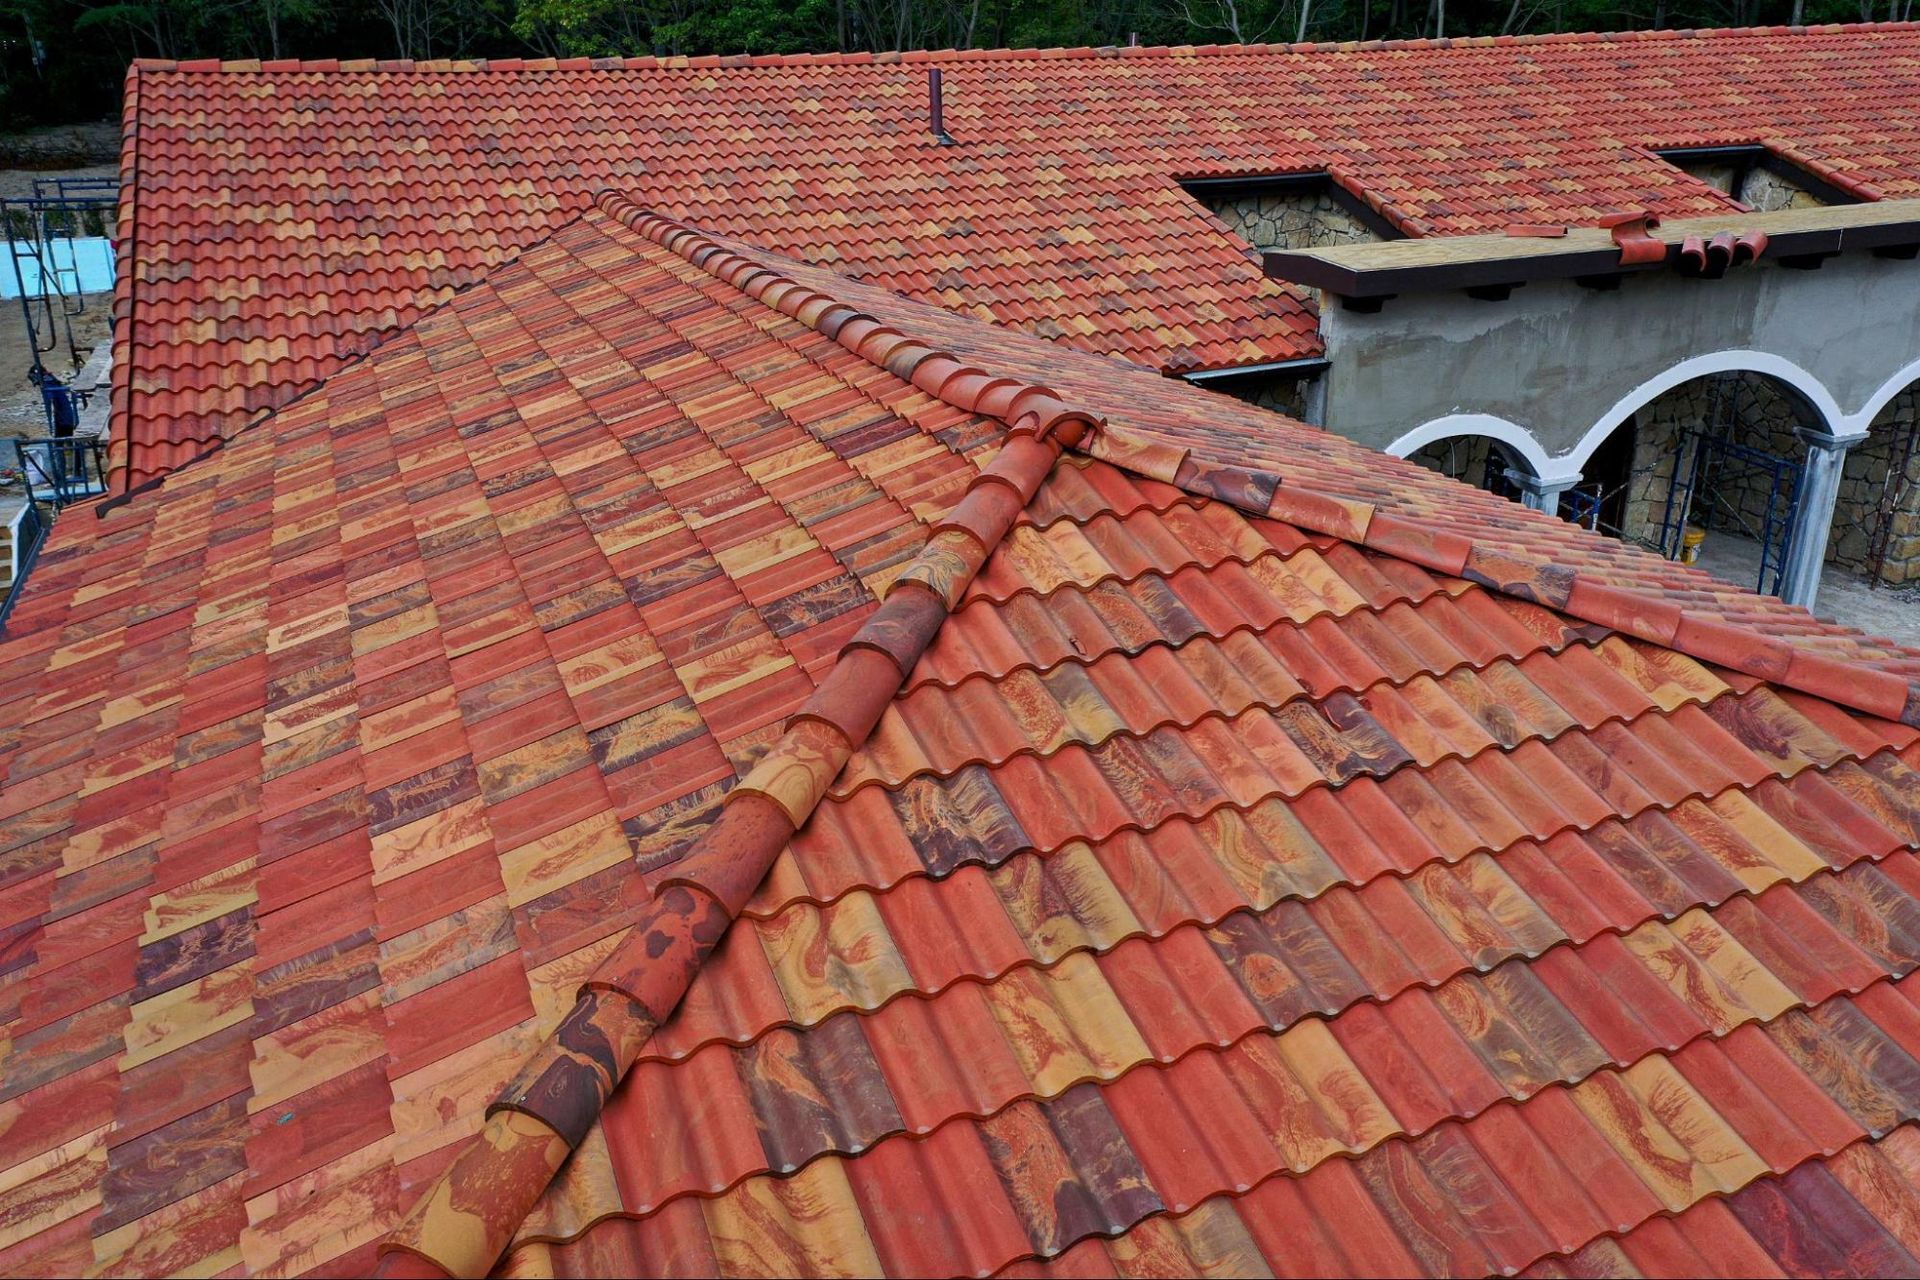 a close up of a red tiled roof on a building .